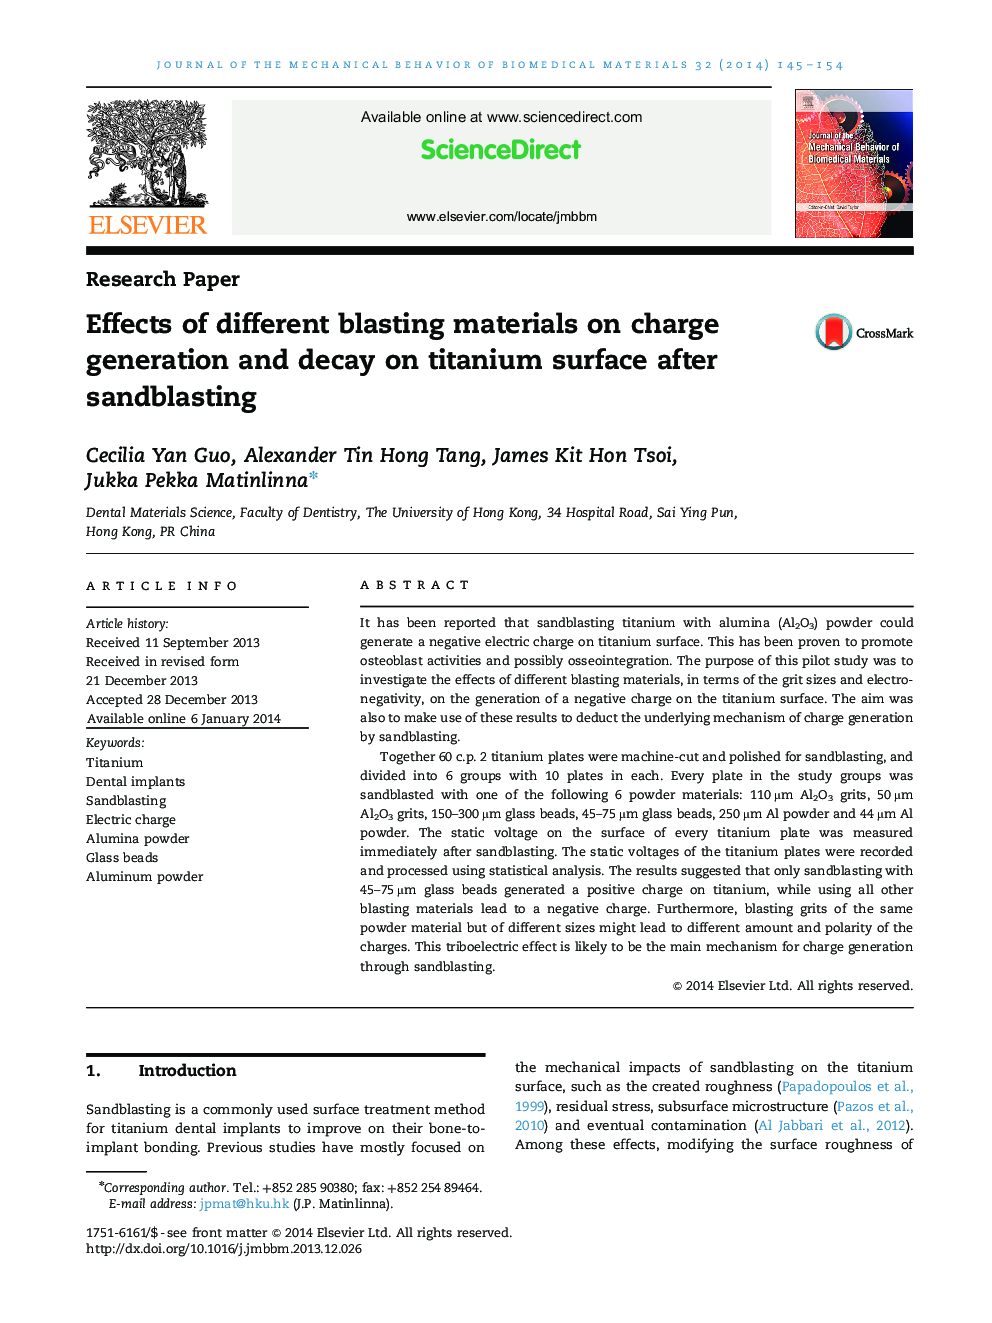 Effects of different blasting materials on charge generation and decay on titanium surface after sandblasting